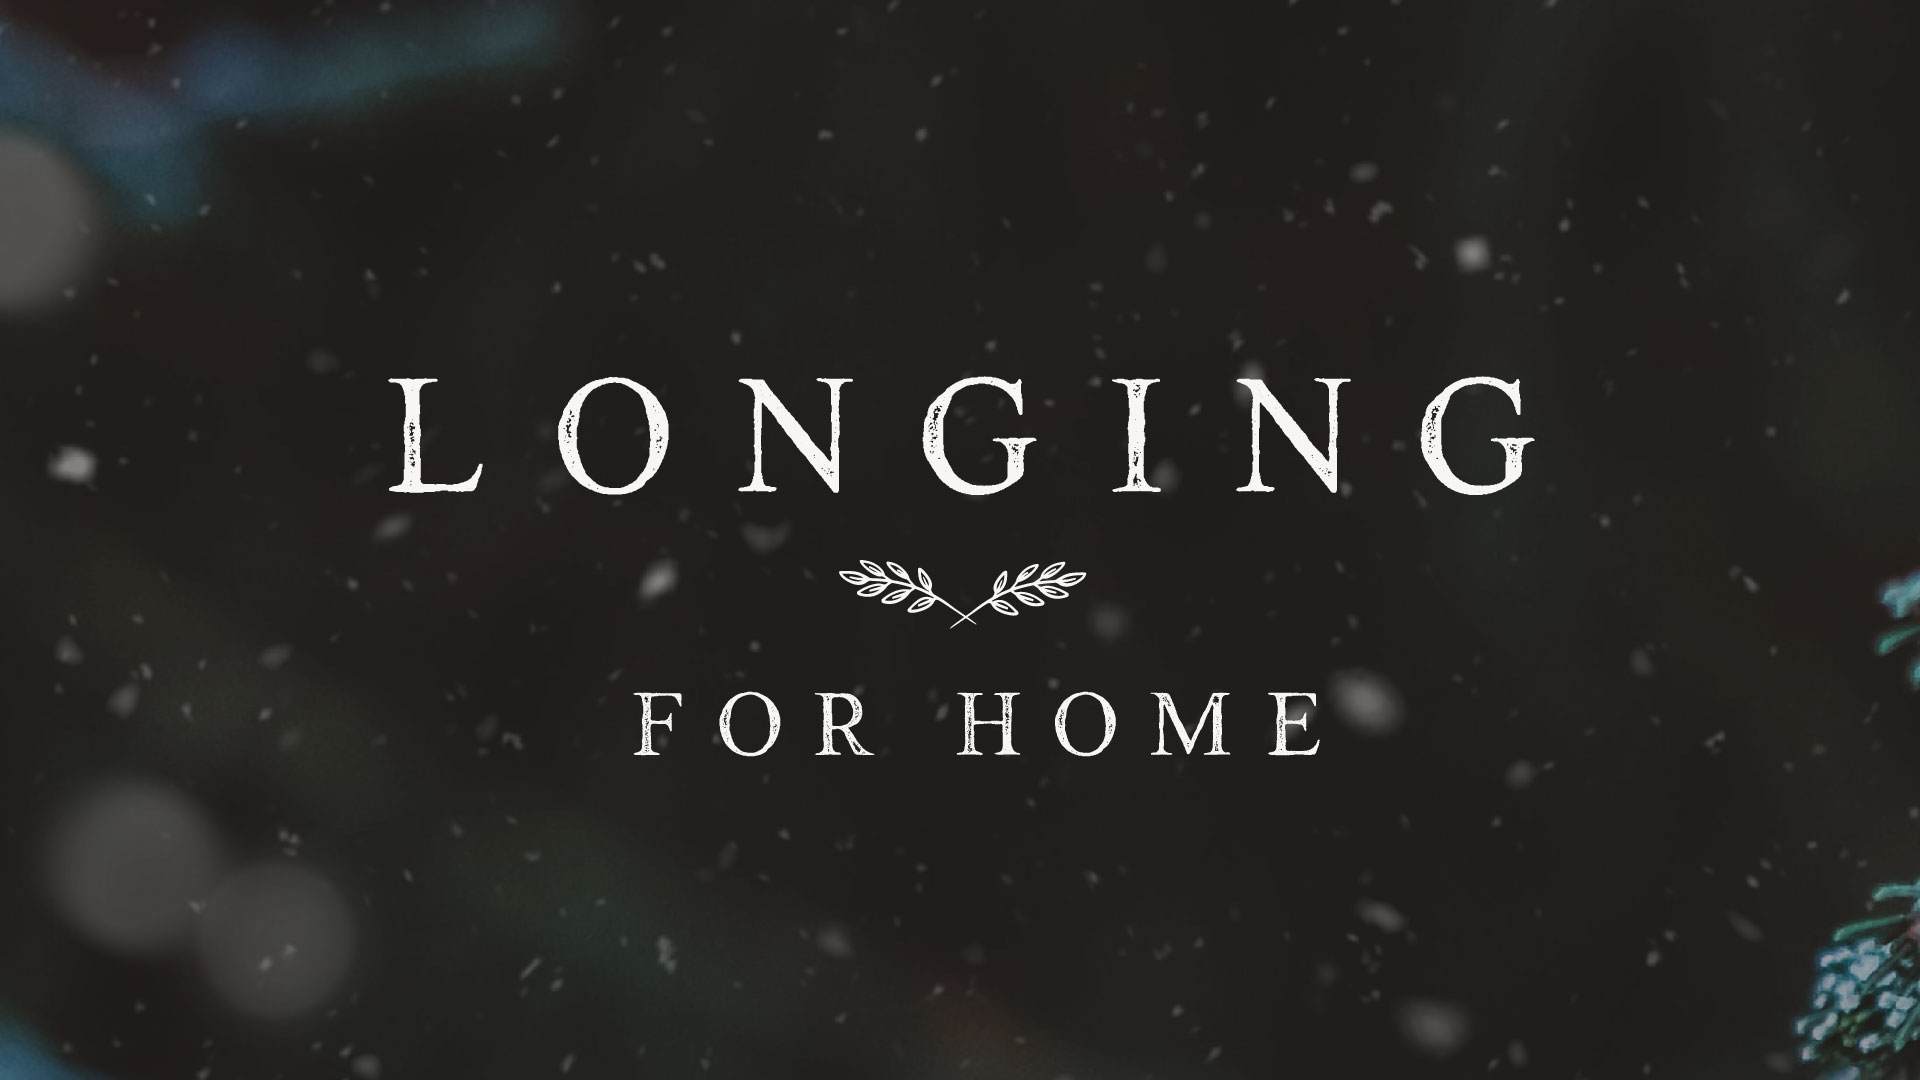 Longing for Home